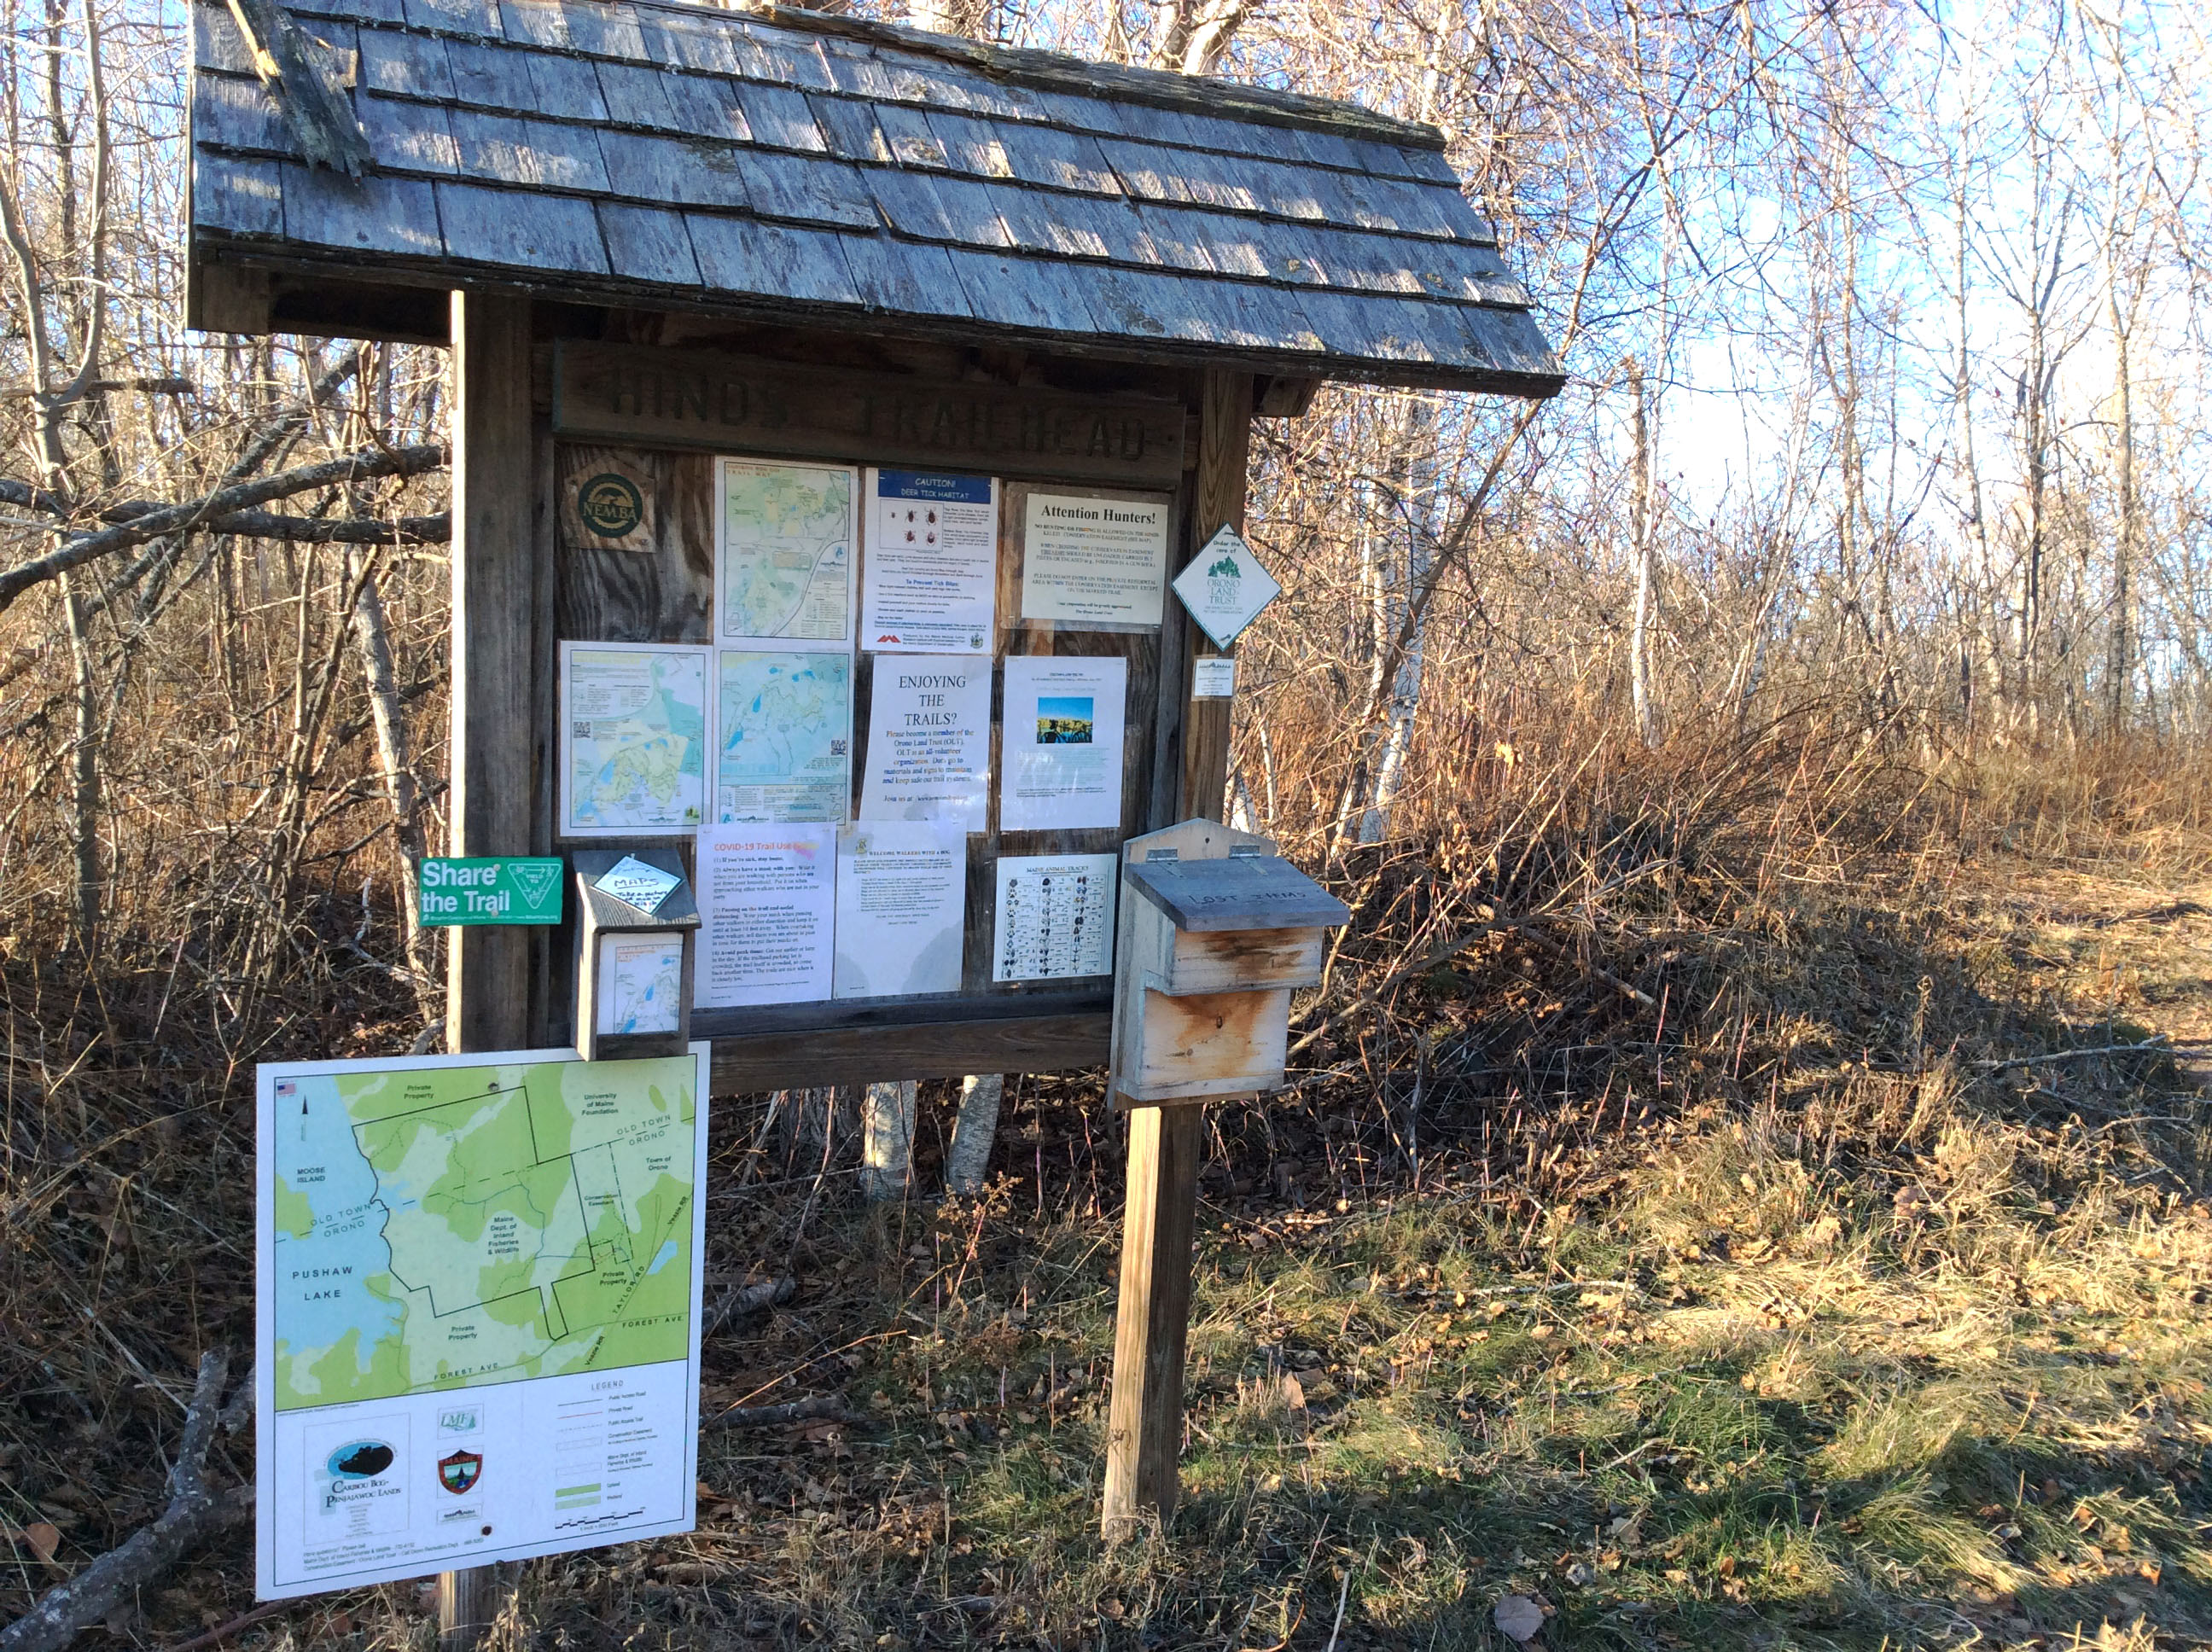 Trails at the Caribou Bog Conservation Area (CBCA) are well marked. This Taylor Road kiosk displays maps and information for the hiker, biker or ski enthusiast.